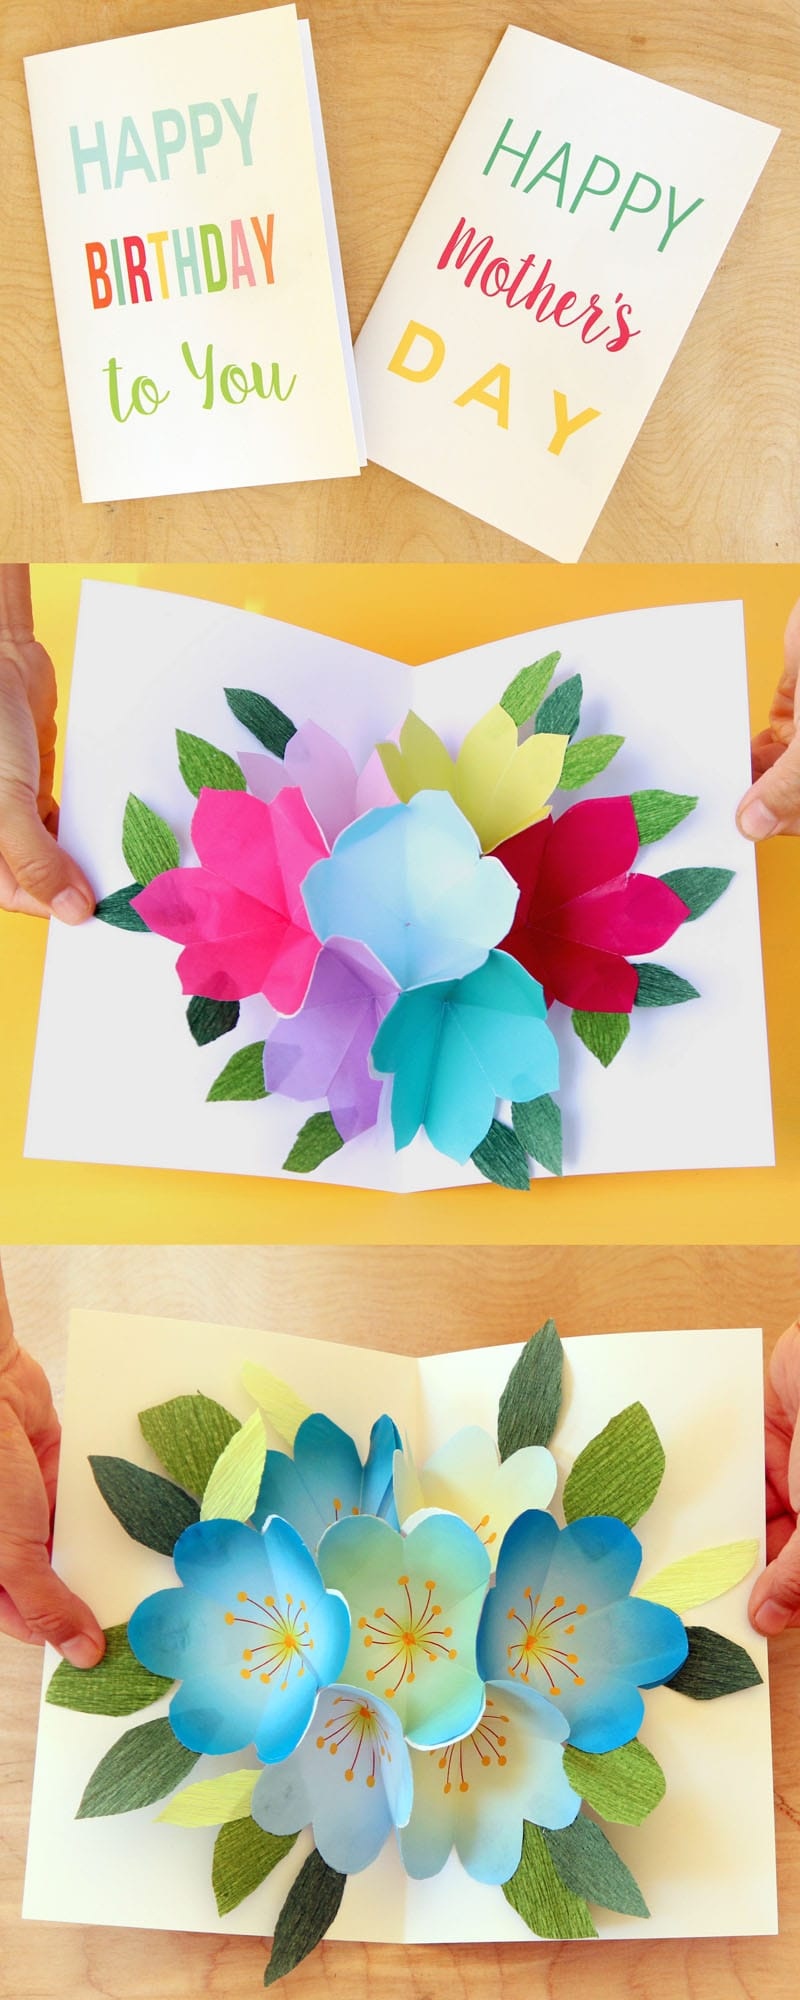 Free Printable Happy Birthday Card With Pop Up Bouquet - A Piece Of - Free Printable Birthday Cards For Her